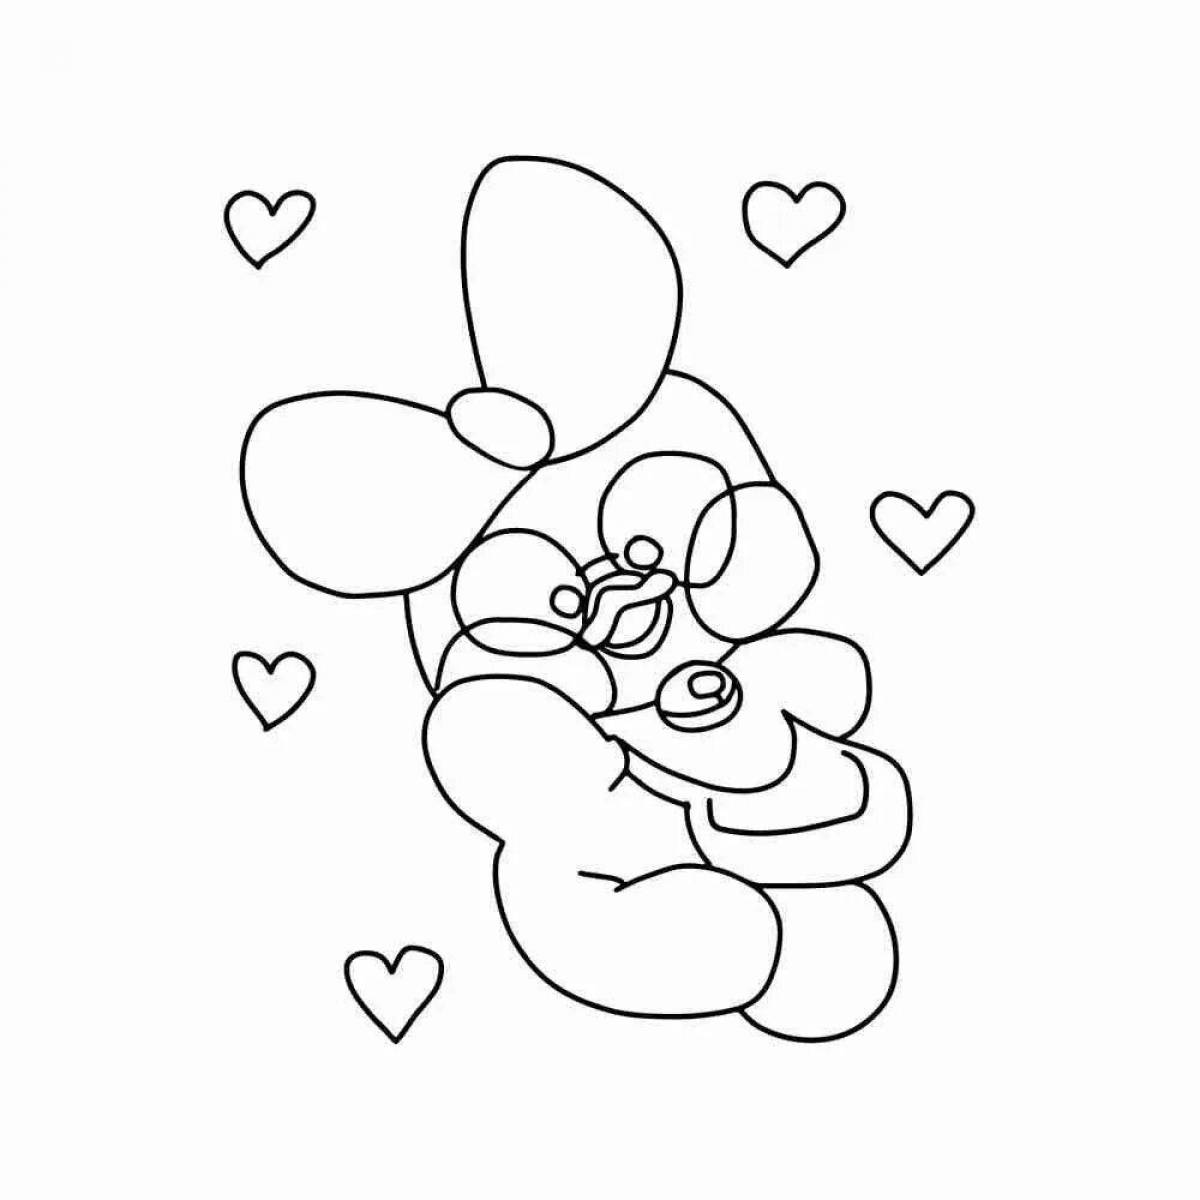 Lalafanfan magic duck coloring page